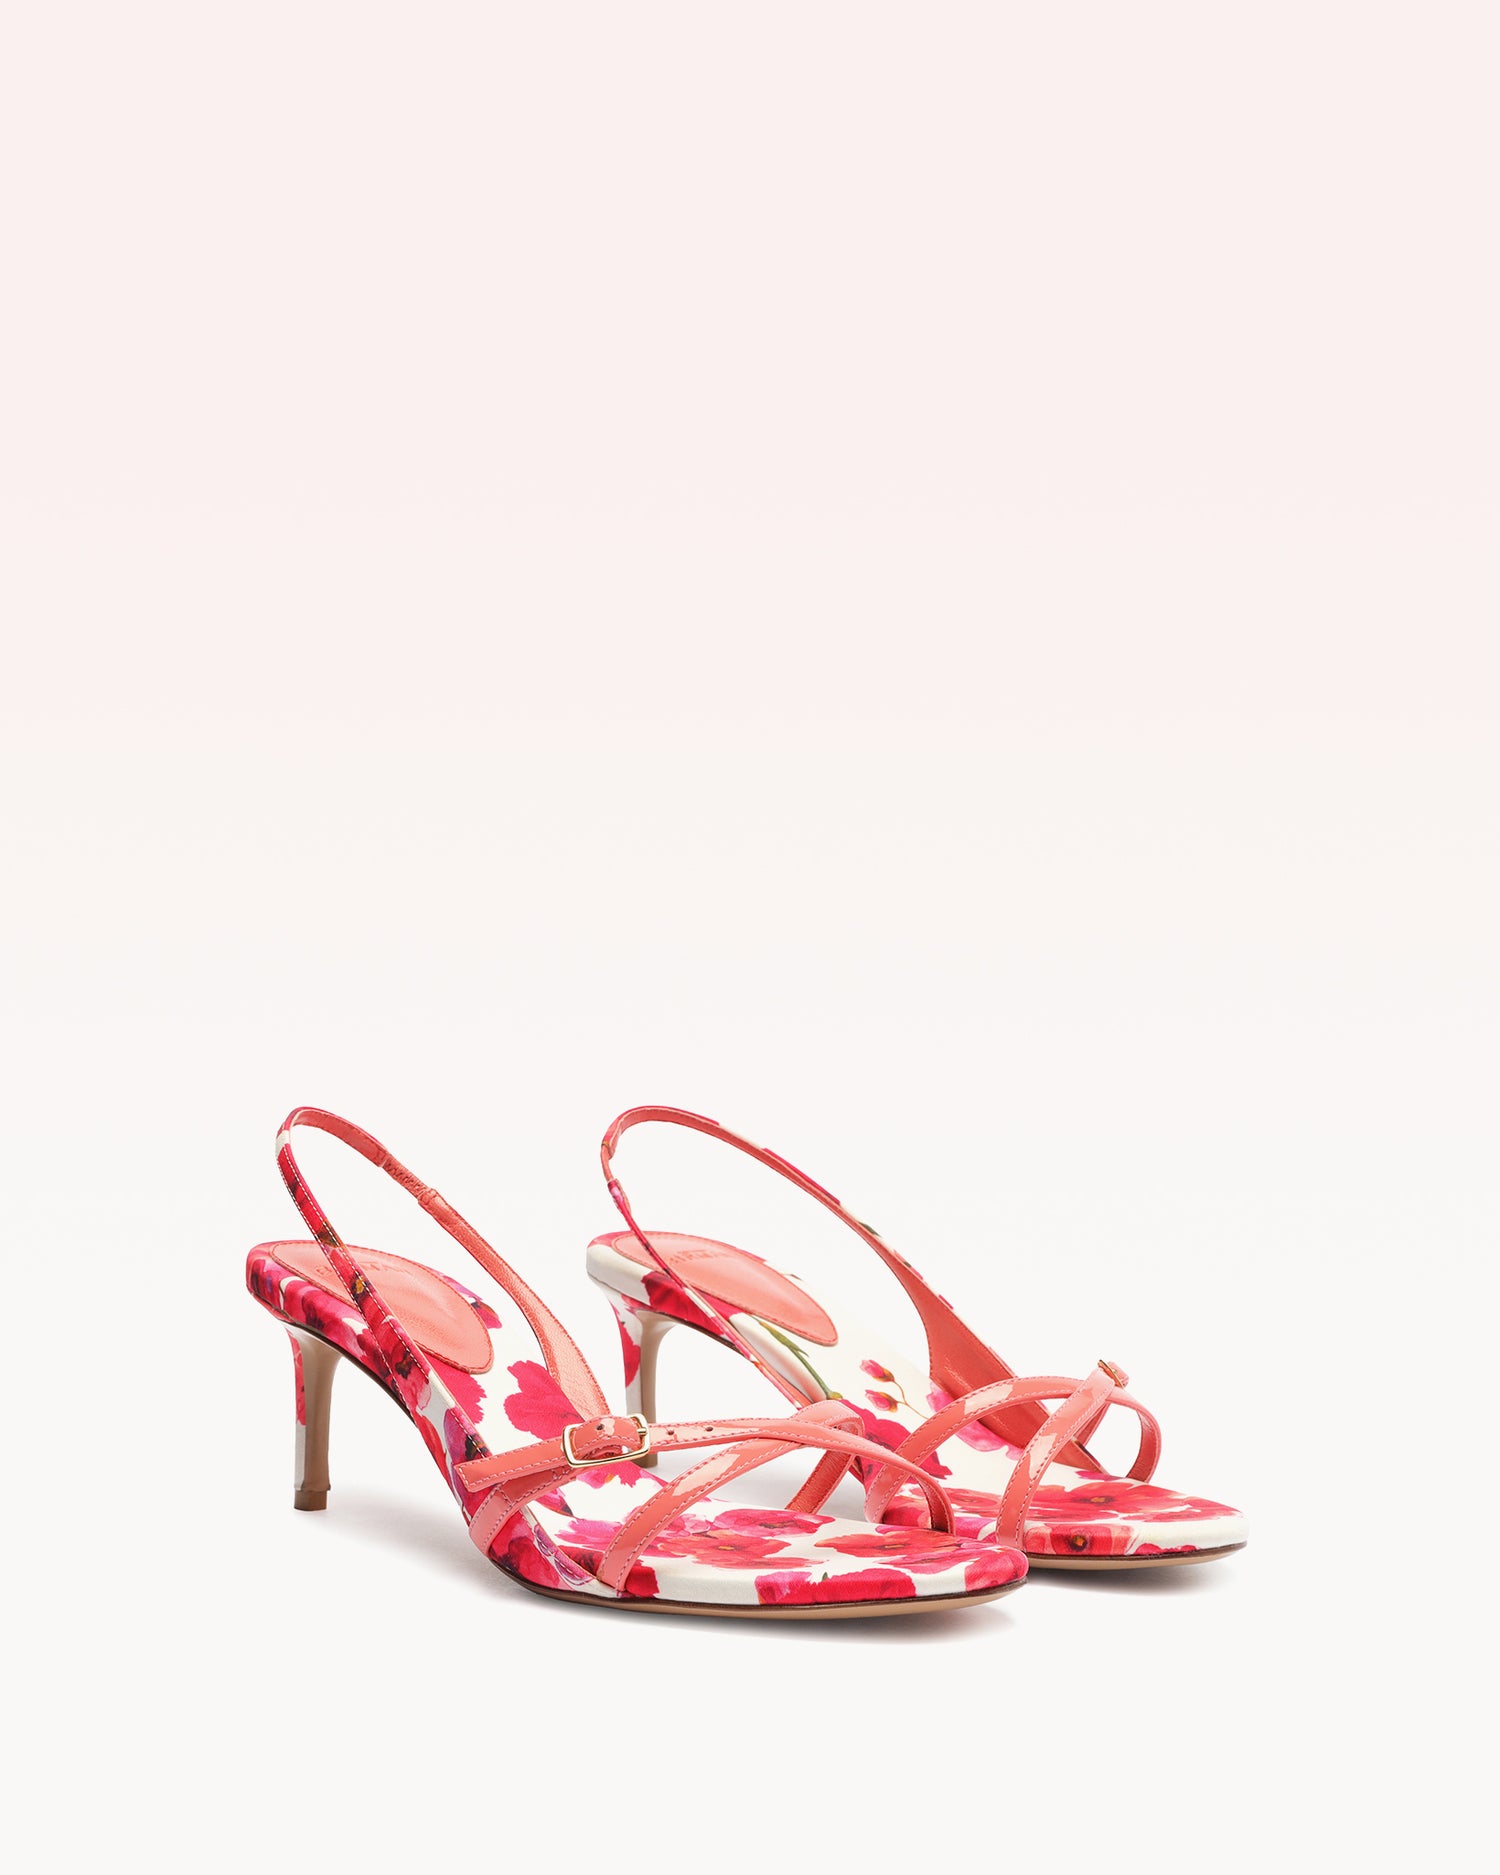 Maia 60 Floral Coral Blossom Sandals S/24   